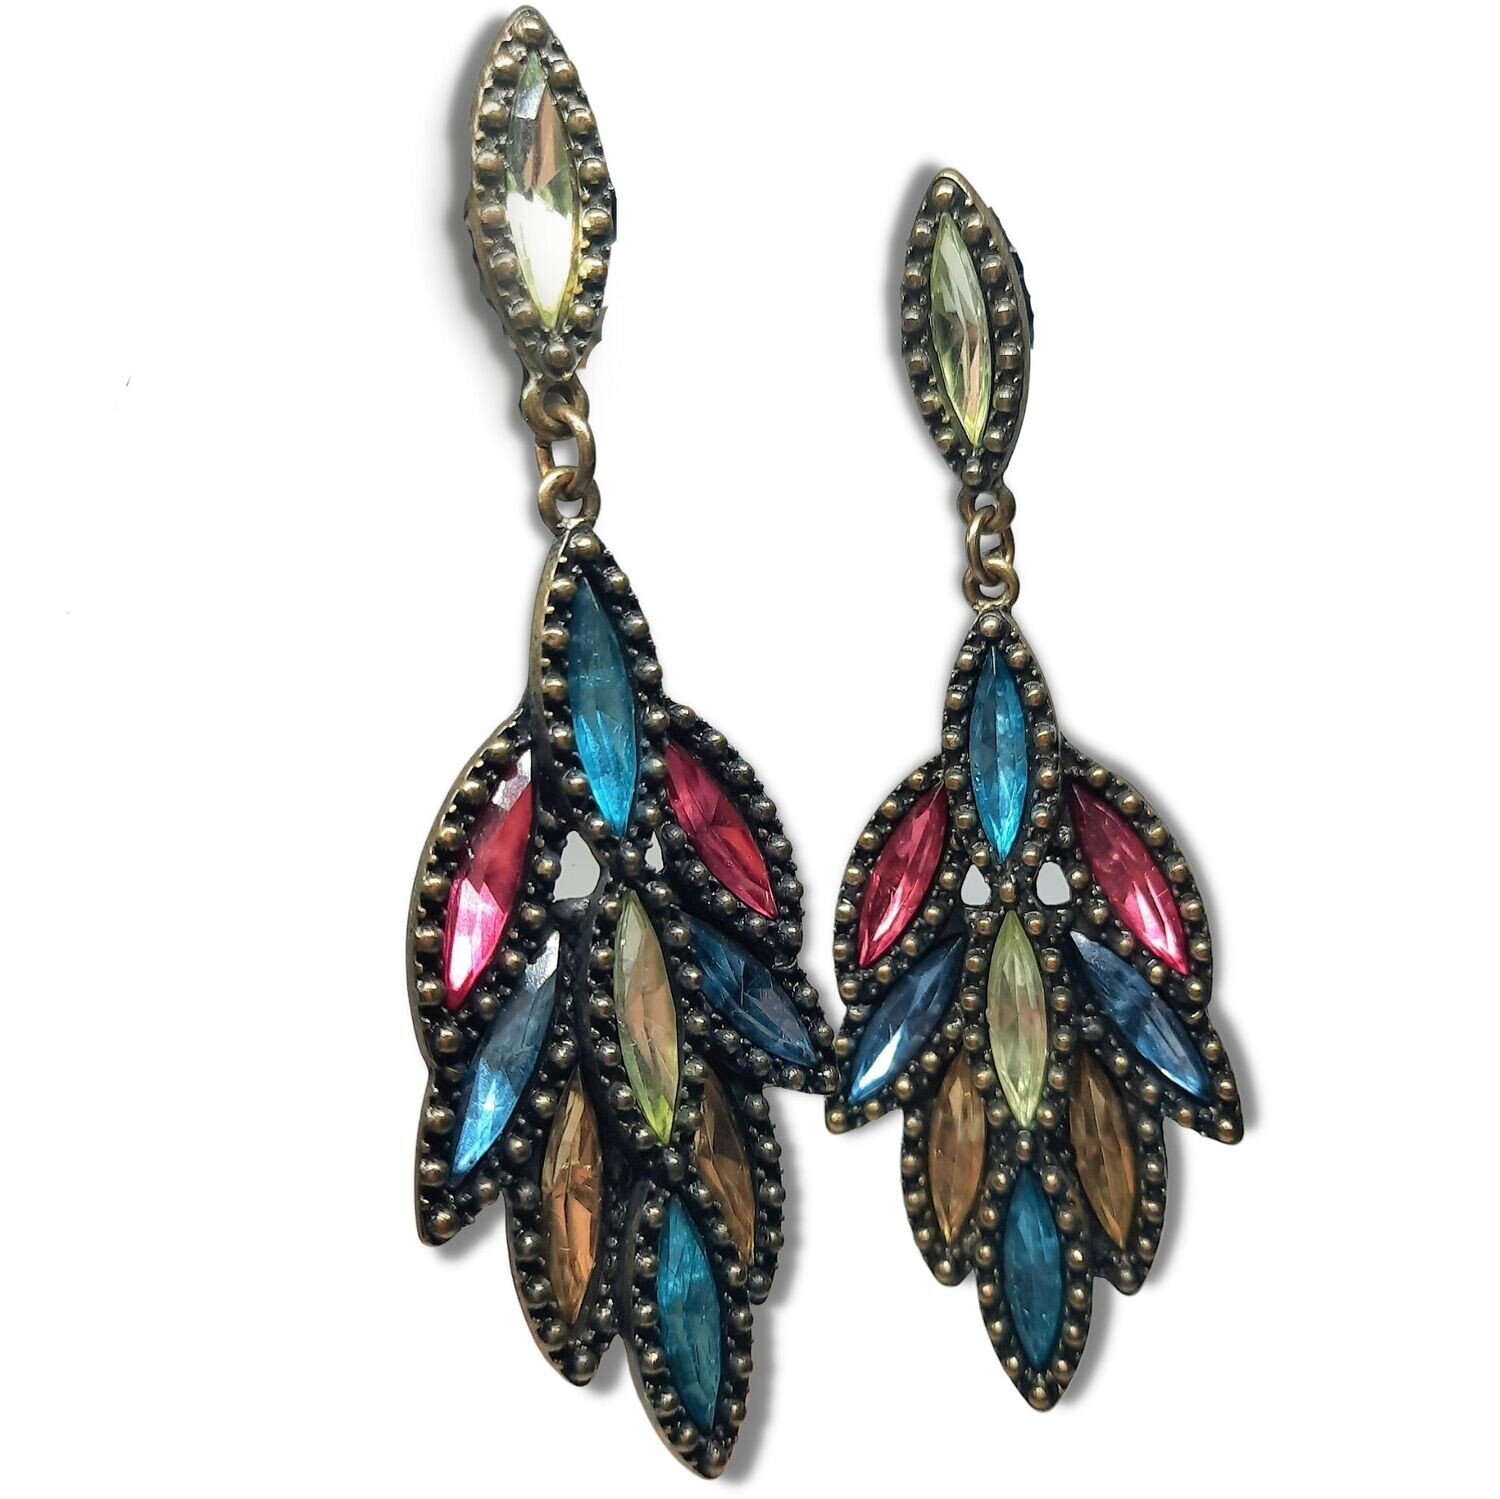 Vintage Peacock Marquise Cut Multicoloured Crystals with Oxidized Textured Studs as Accents Earrings c. 1980's